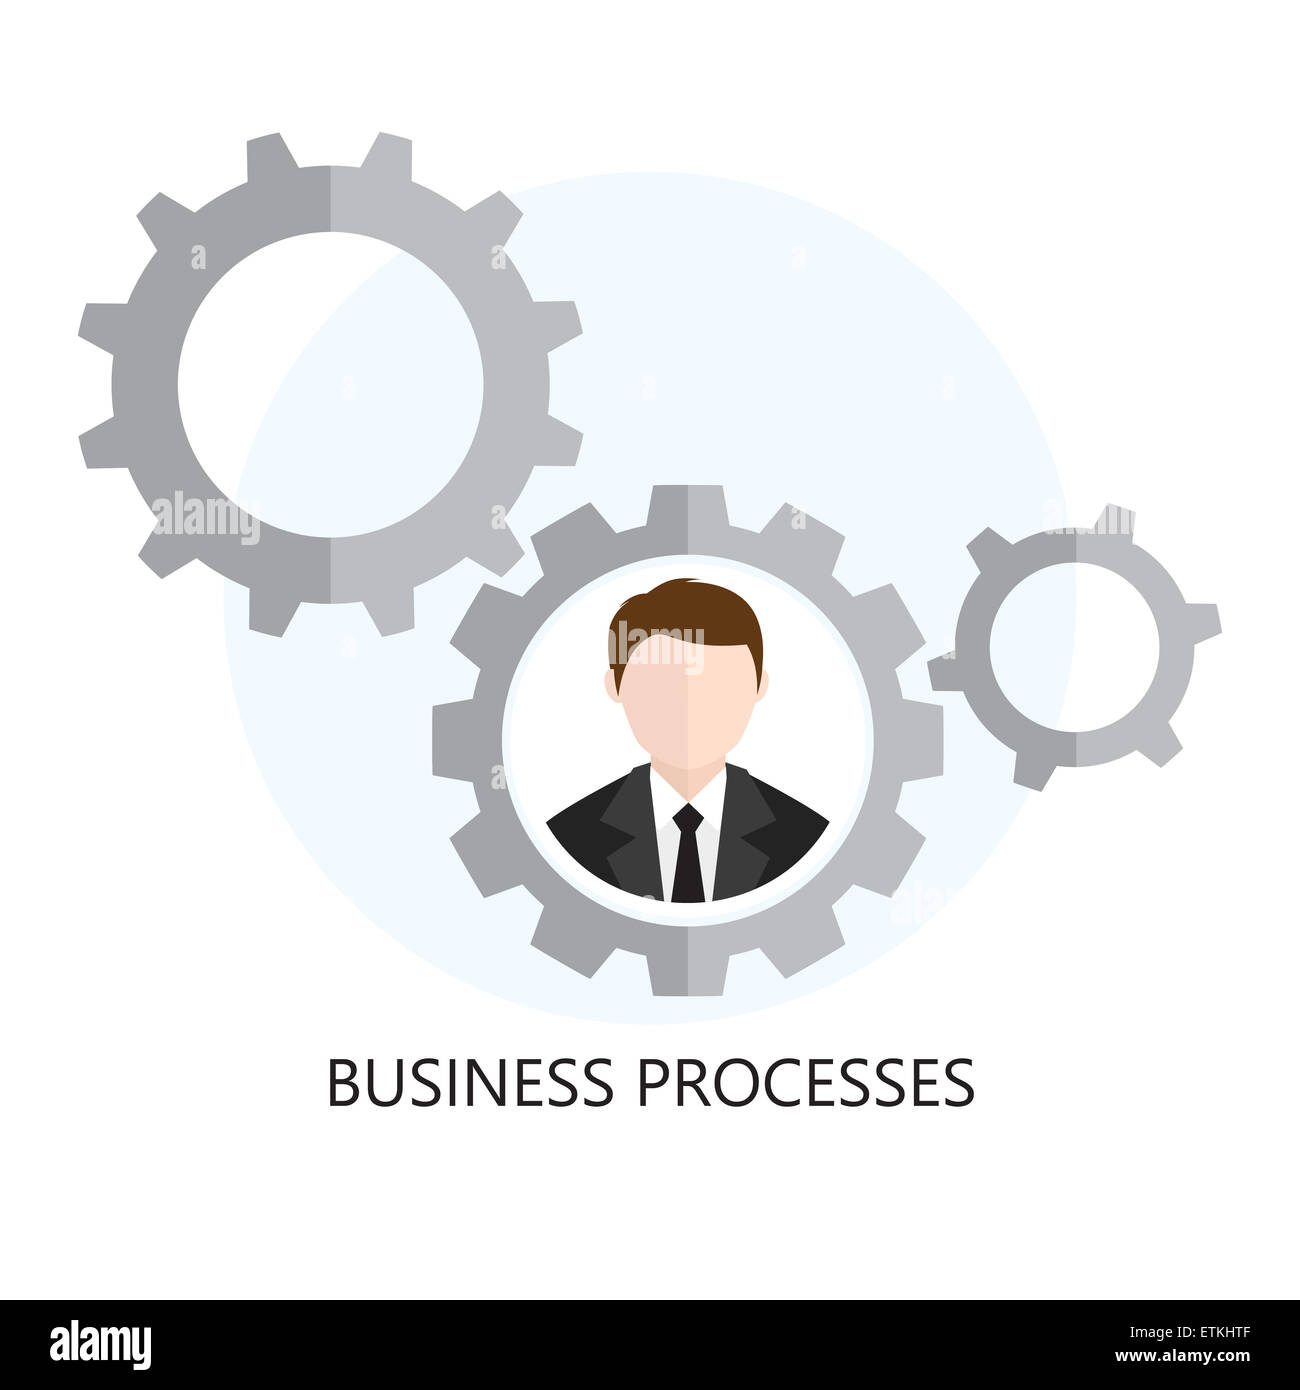 Business Processes Icon Flat design  Concept Isolated on White Background Stock Photo